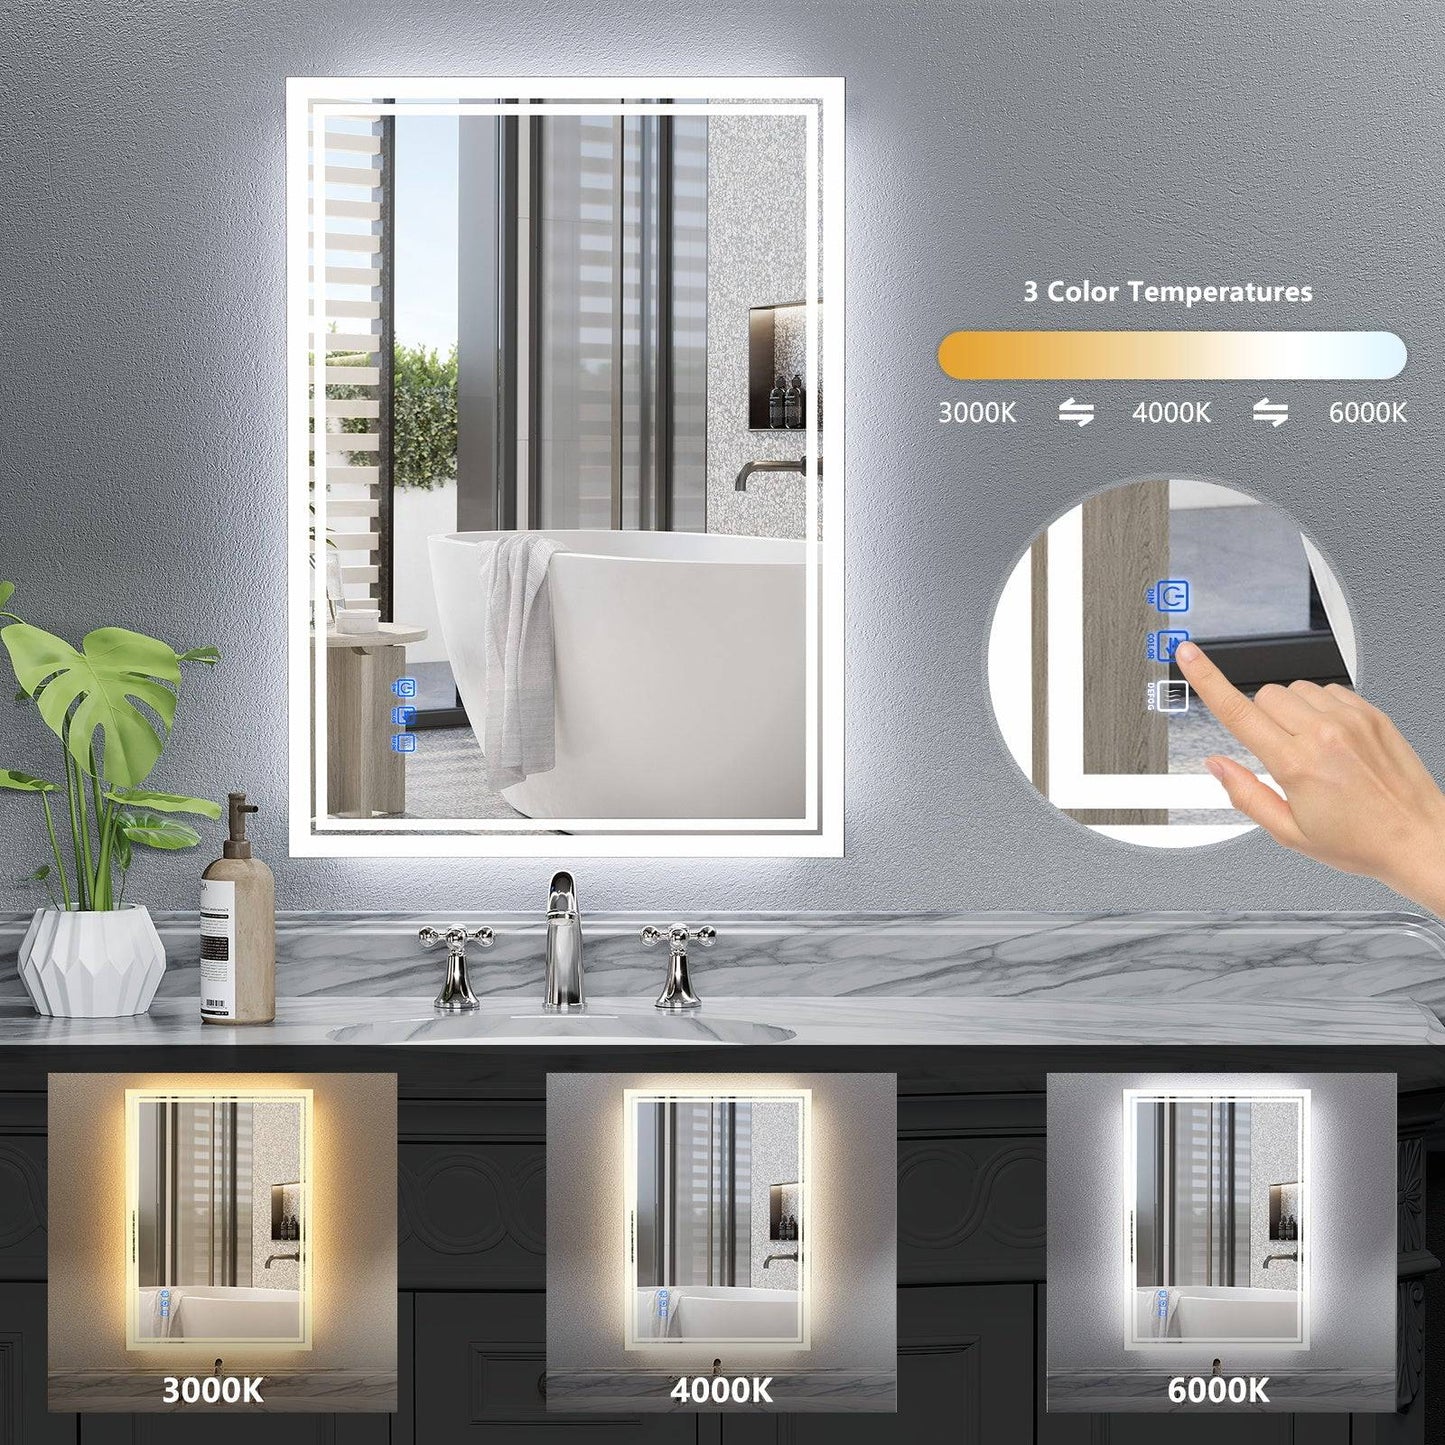 24 x 36 LED Backlit Mirror Bathroom Vanity with Lights,3 Colors LED Mirror for Bathroom， Anti-Fog, Dimmable, CRI90+, Touch Button, Water Proof